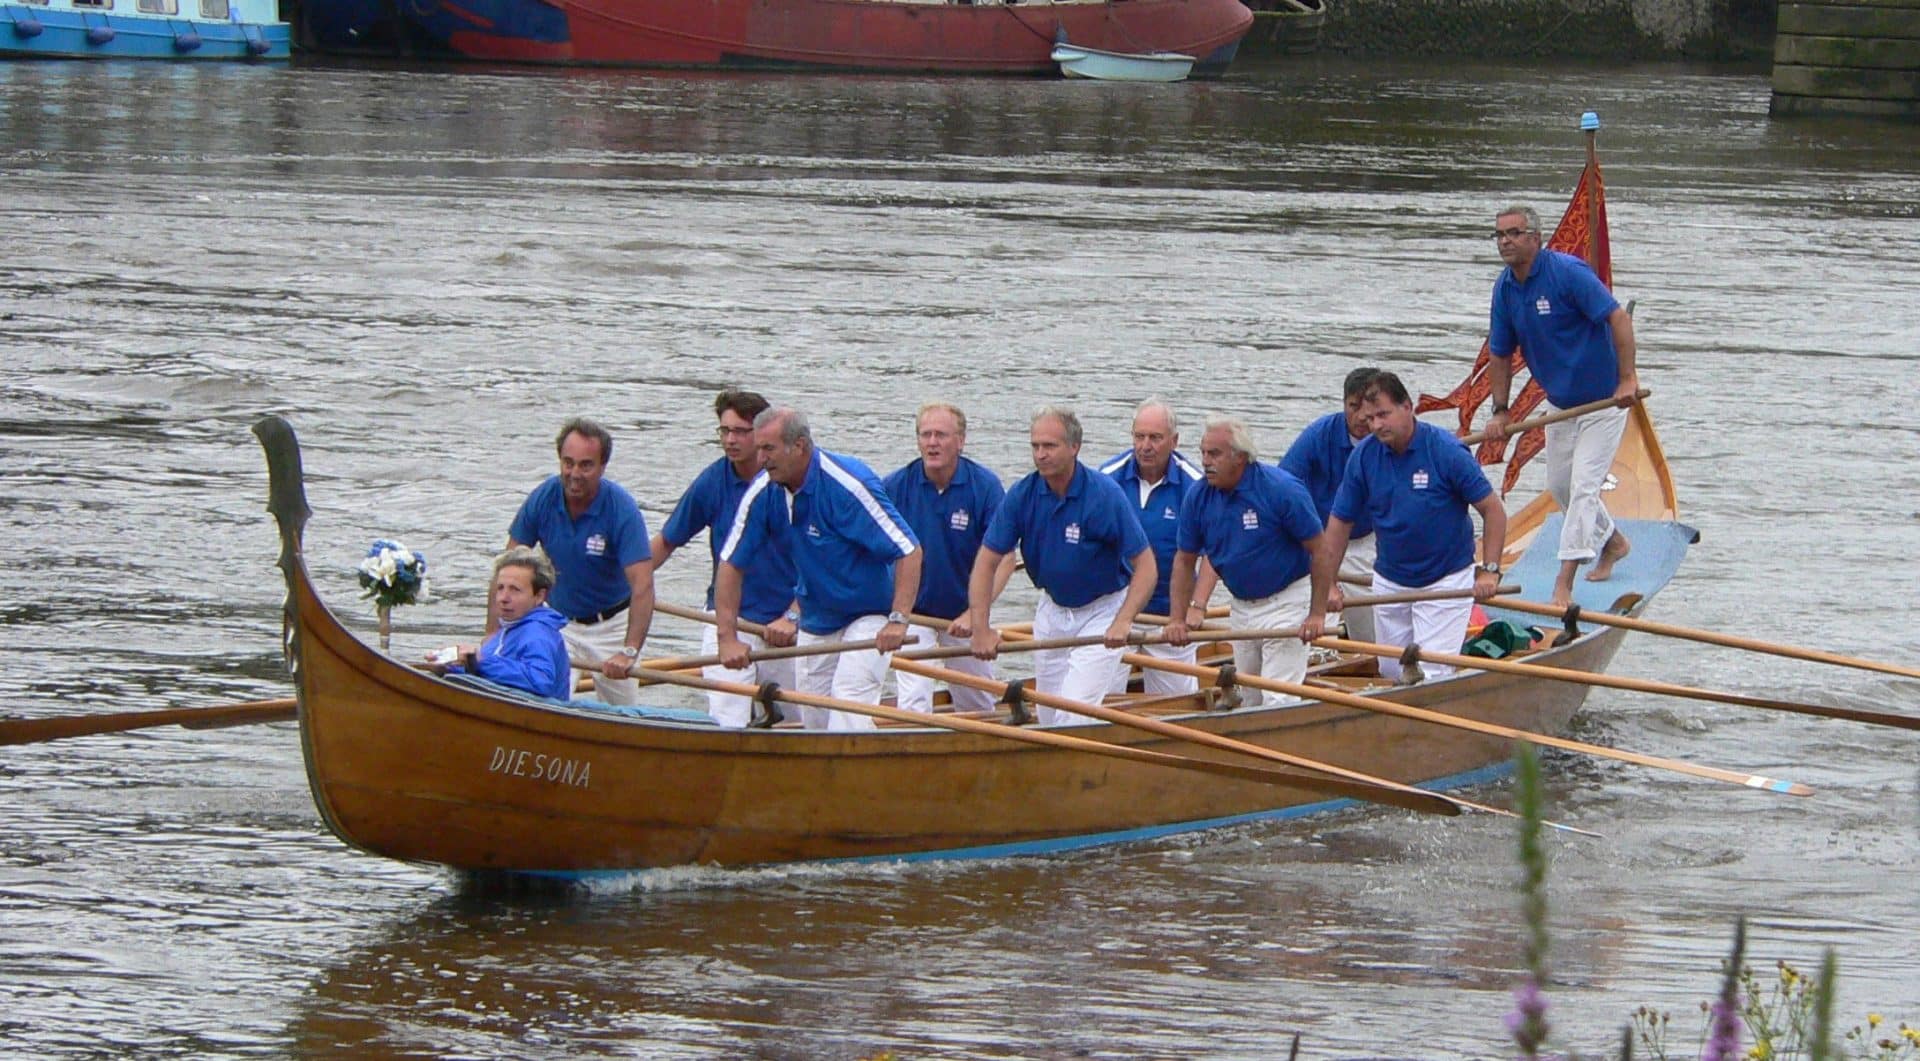 2007-7 Diesona on the Thames